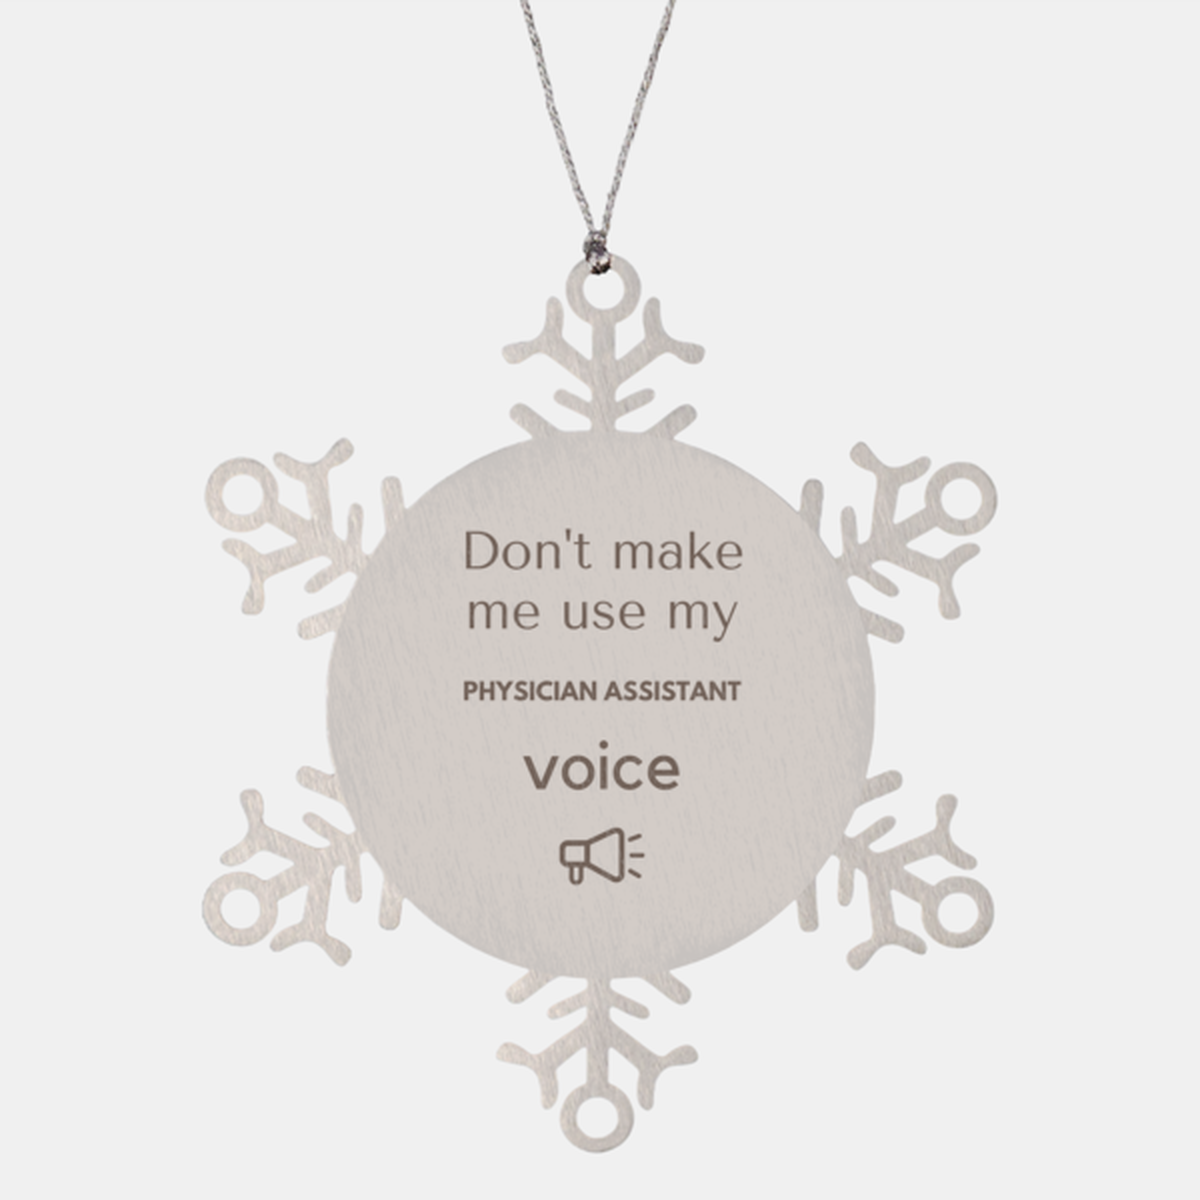 Don't make me use my Physician Assistant voice, Sarcasm Physician Assistant Ornament Gifts, Christmas Physician Assistant Snowflake Ornament Unique Gifts For Physician Assistant Coworkers, Men, Women, Colleague, Friends